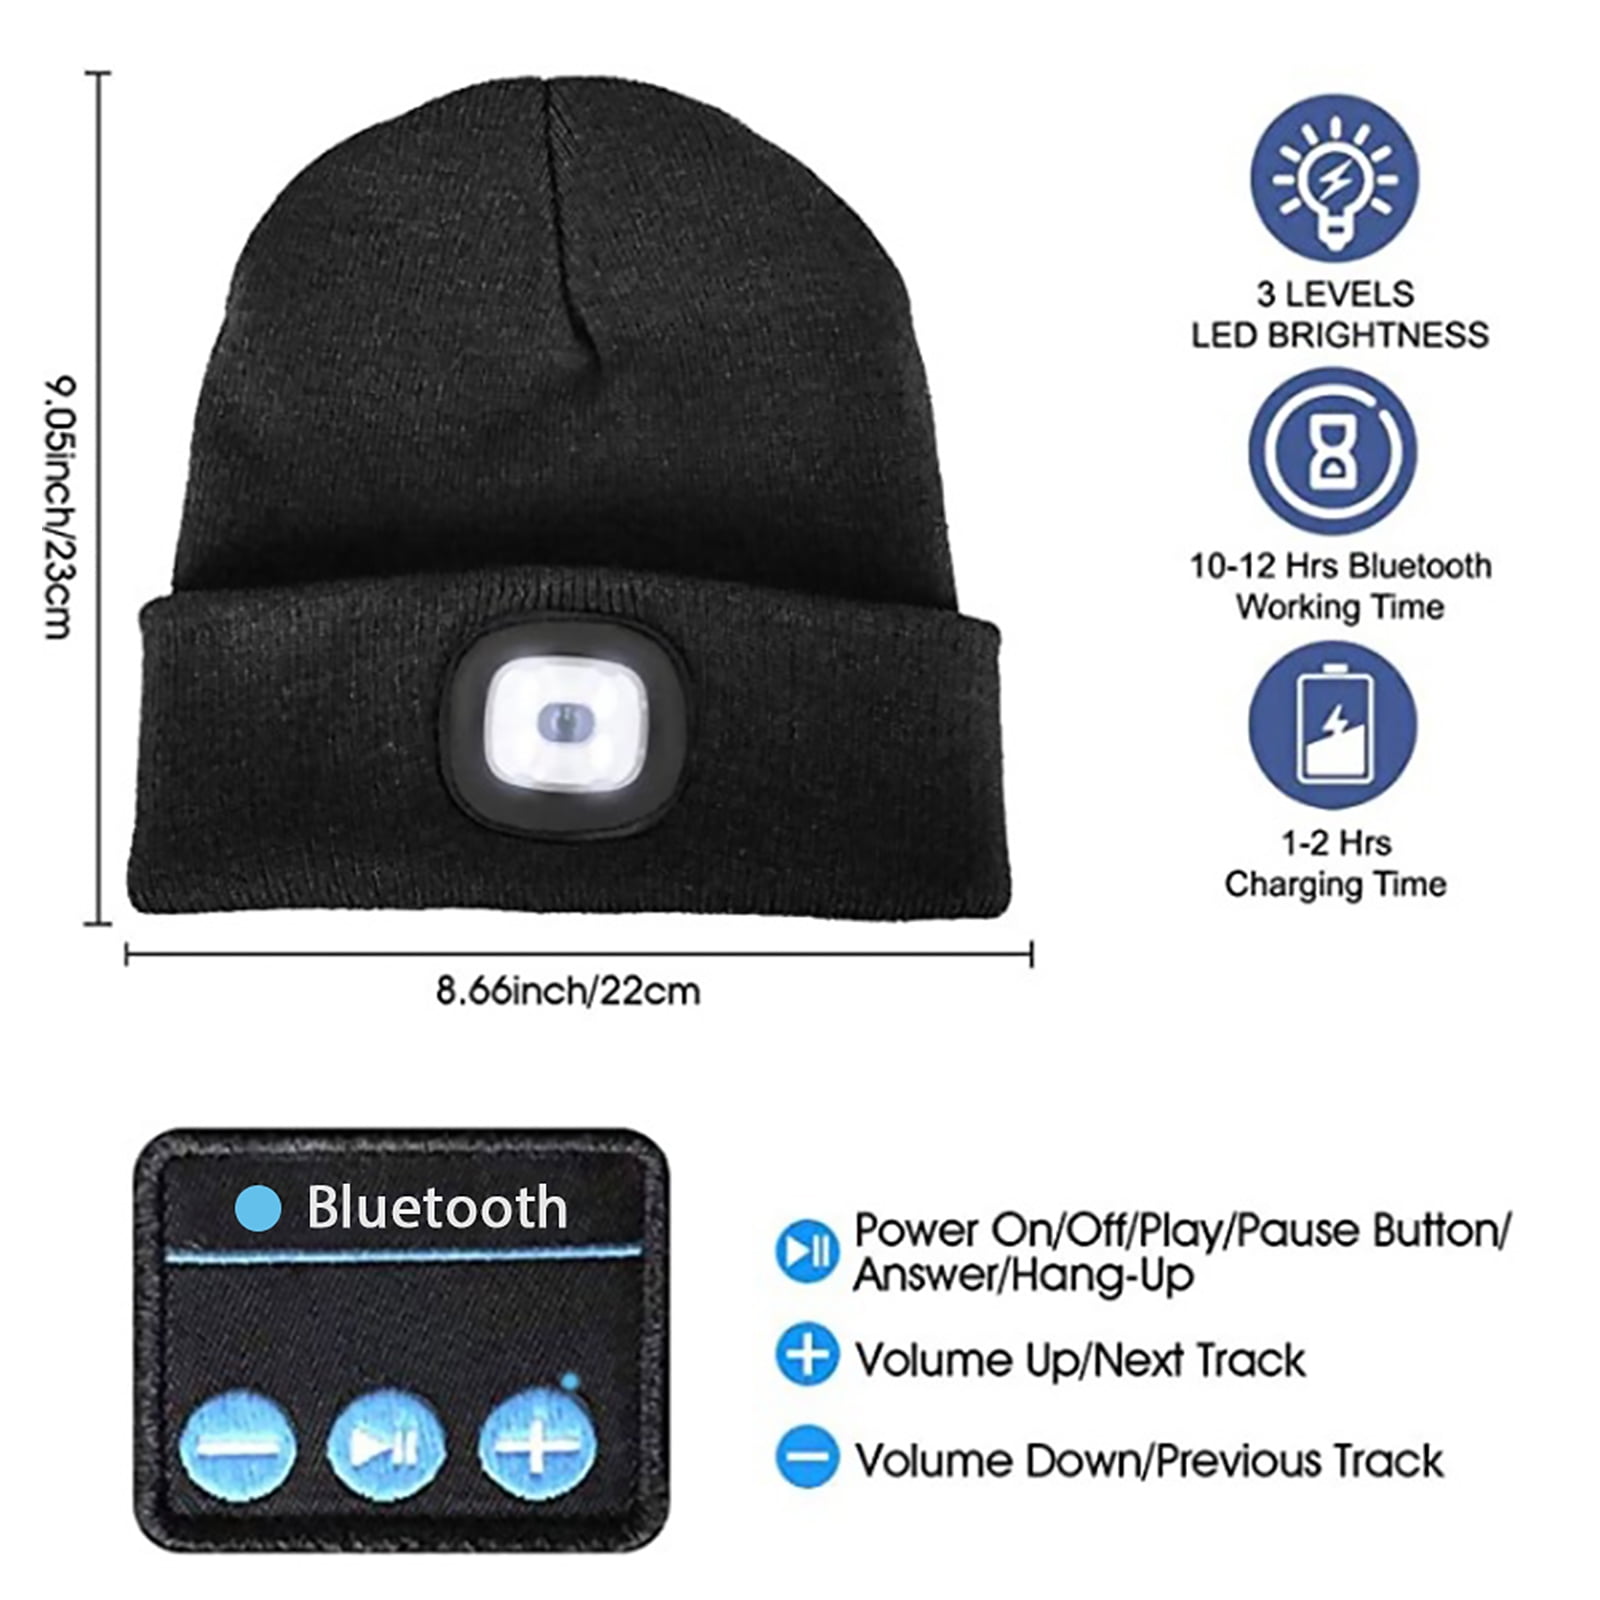 Viworld Unisex Bluetooth Beanie Hat with Light,4 LED USB Rechargeable  Wireless Headphones Tech Caps,Gifts for Men Women Teen Boys (Black) 